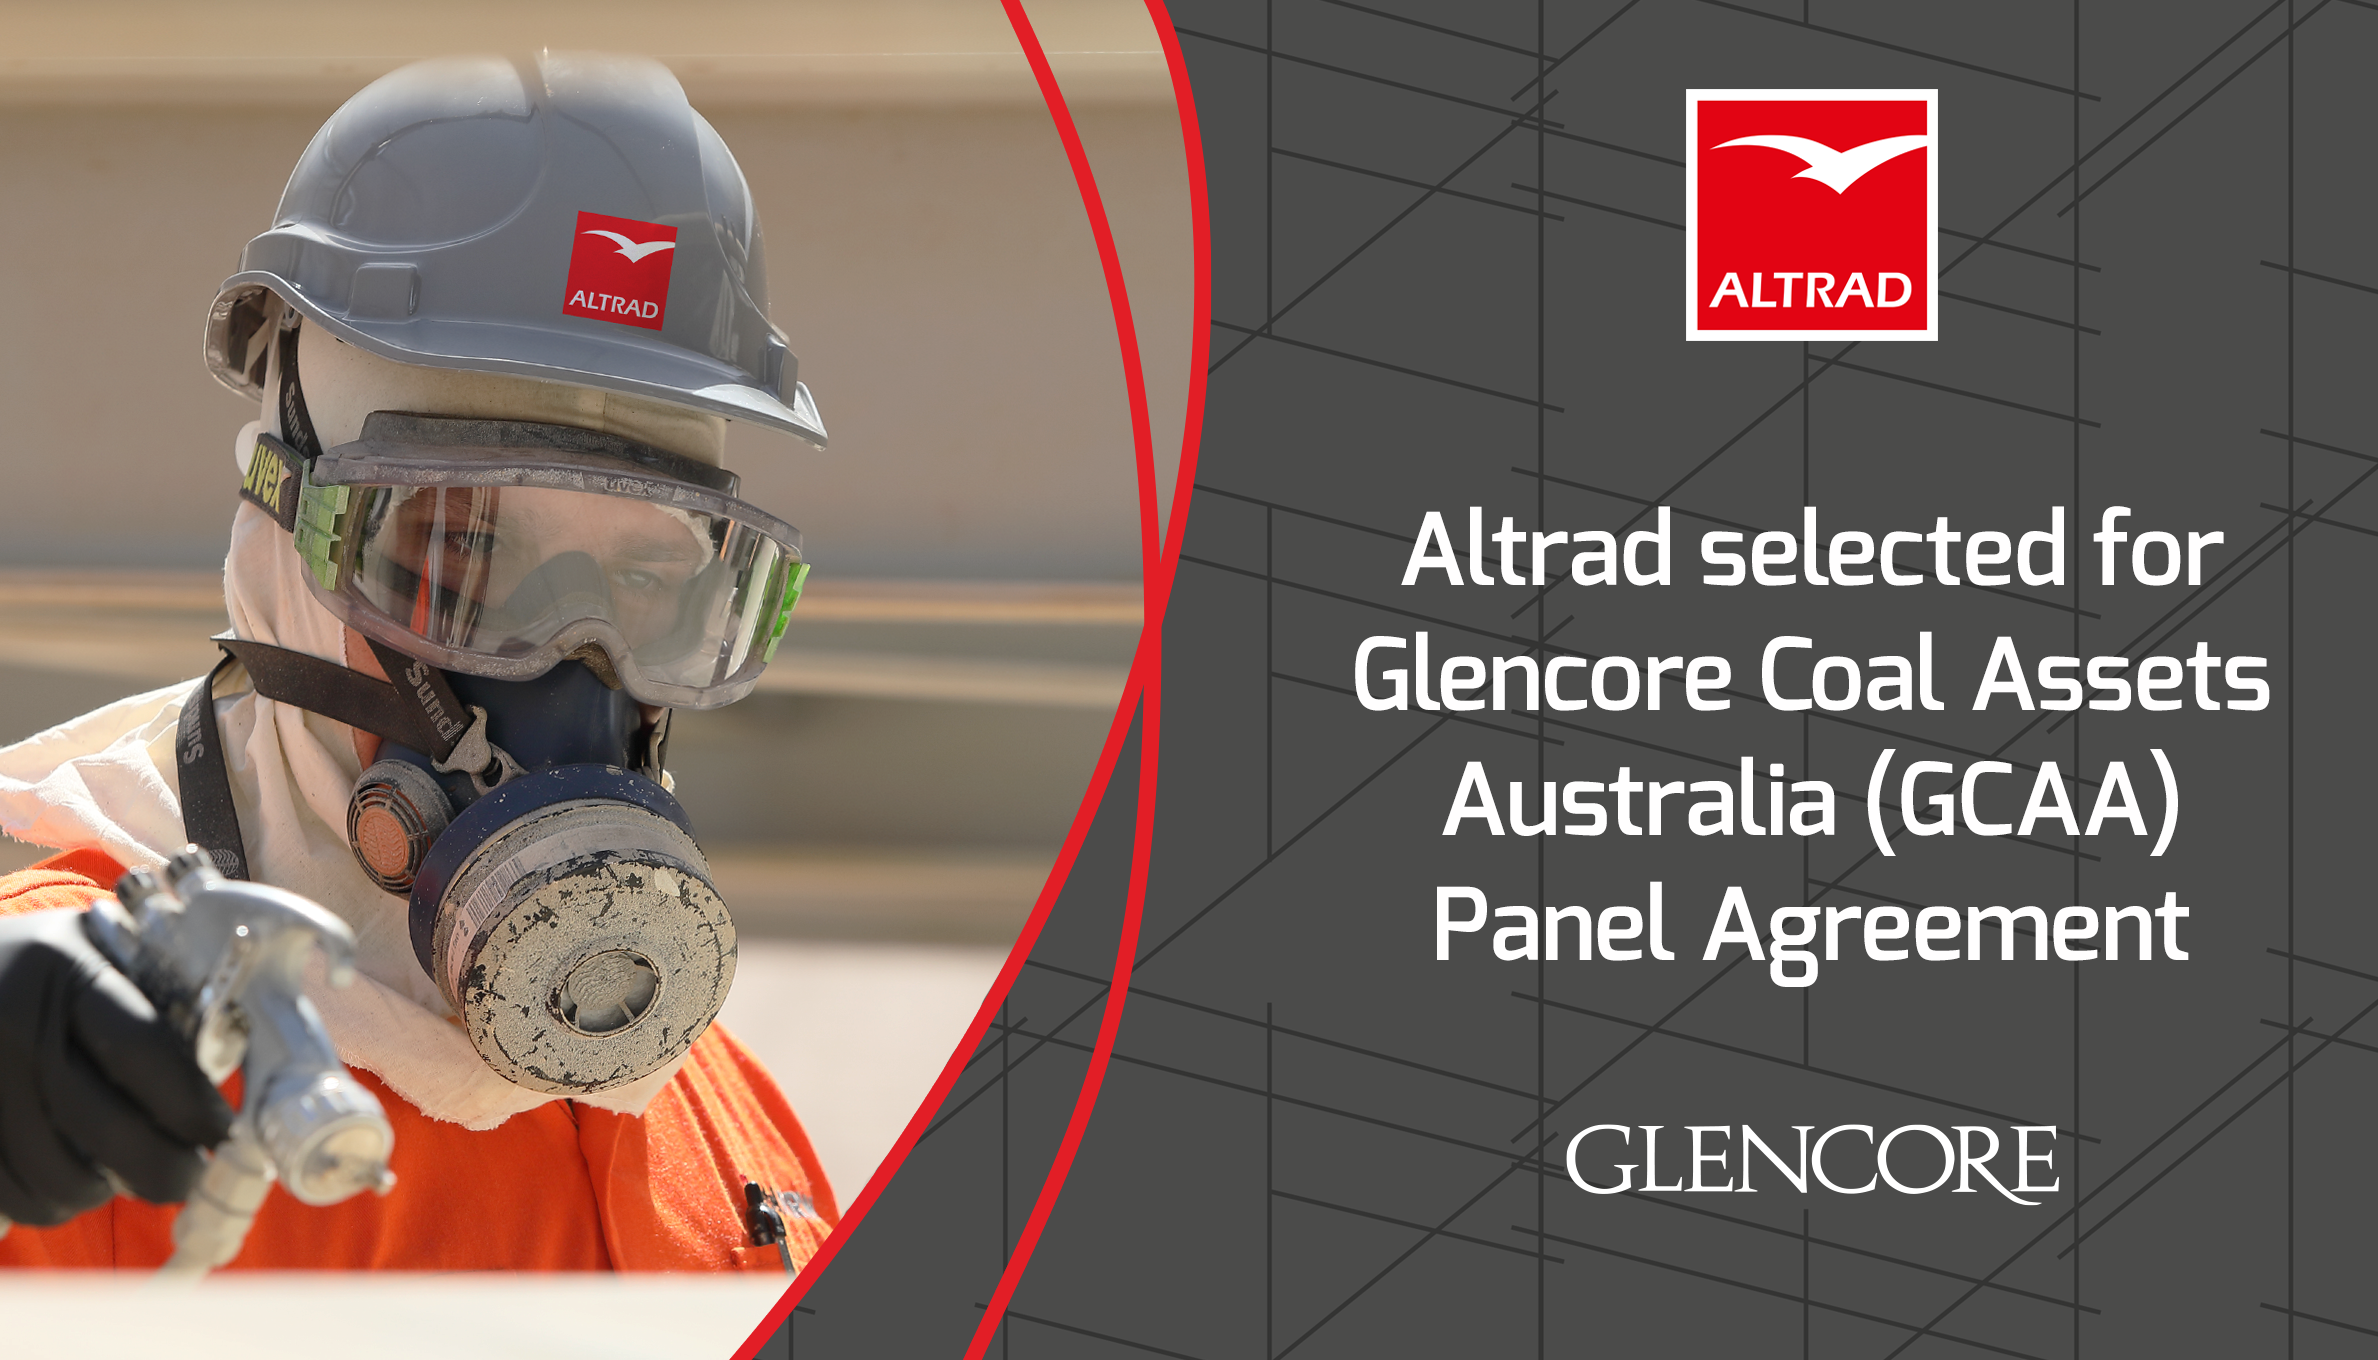 Altrad selected for Glencore Coal Assets Panel Agreement